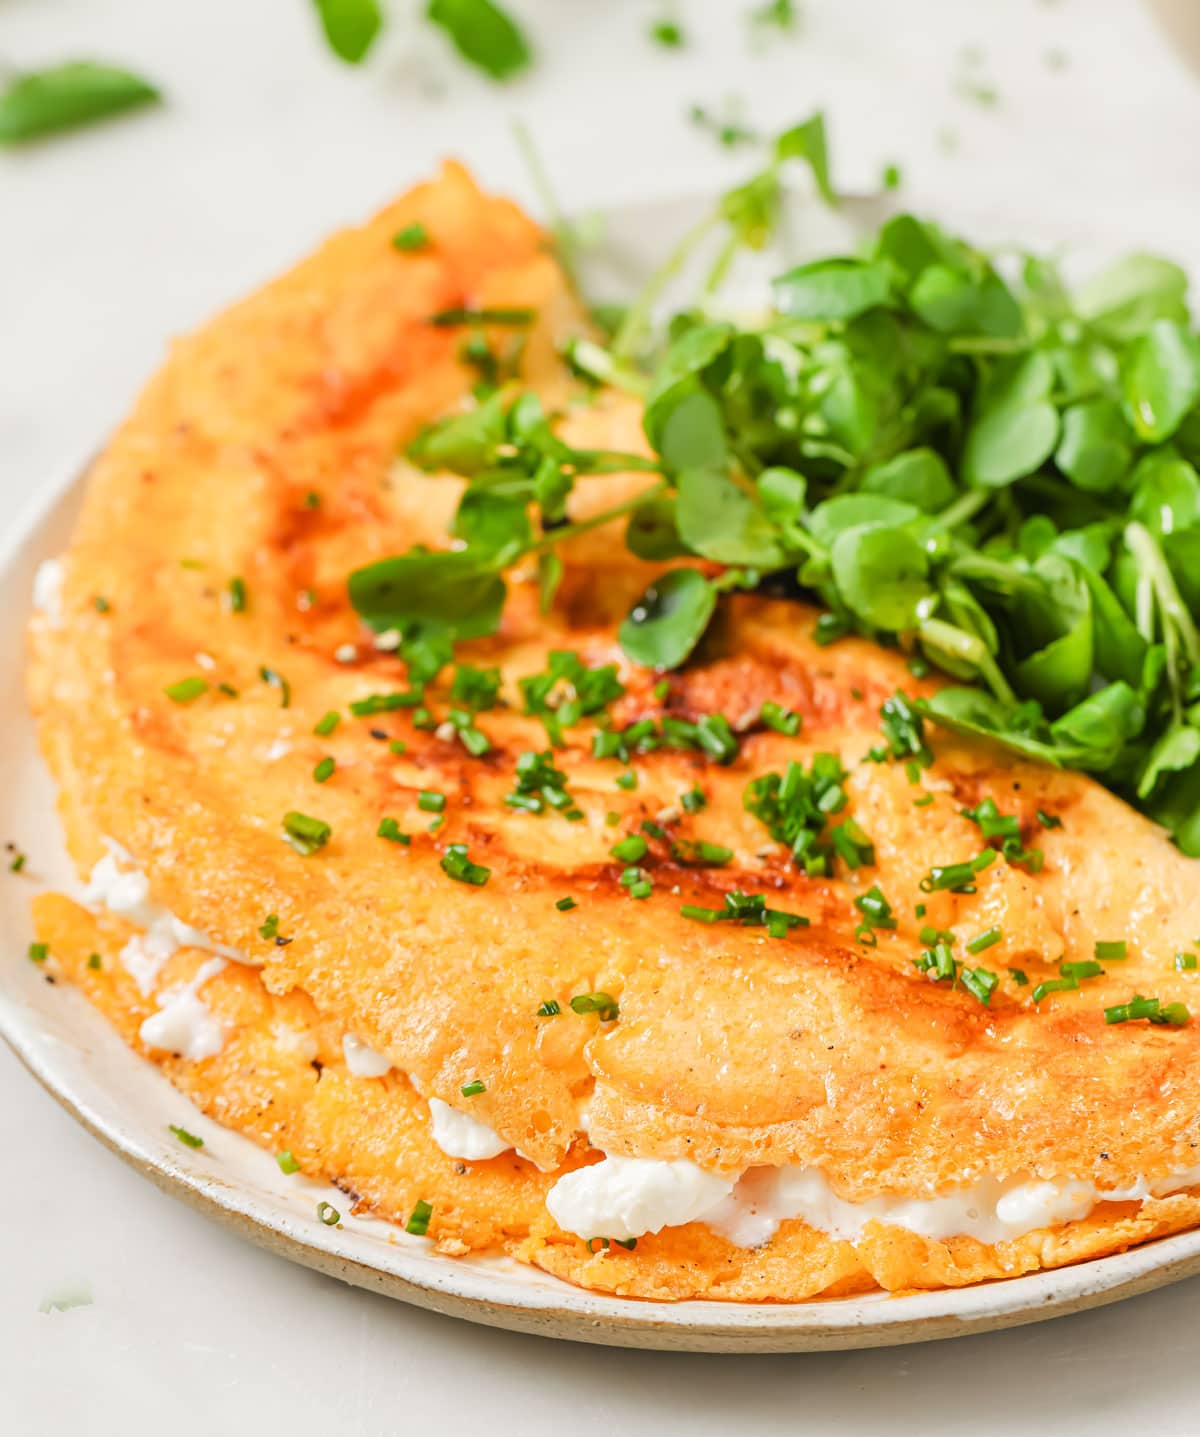 A cottage cheese omelette filled with cottage cheese and topped with chopped chives.